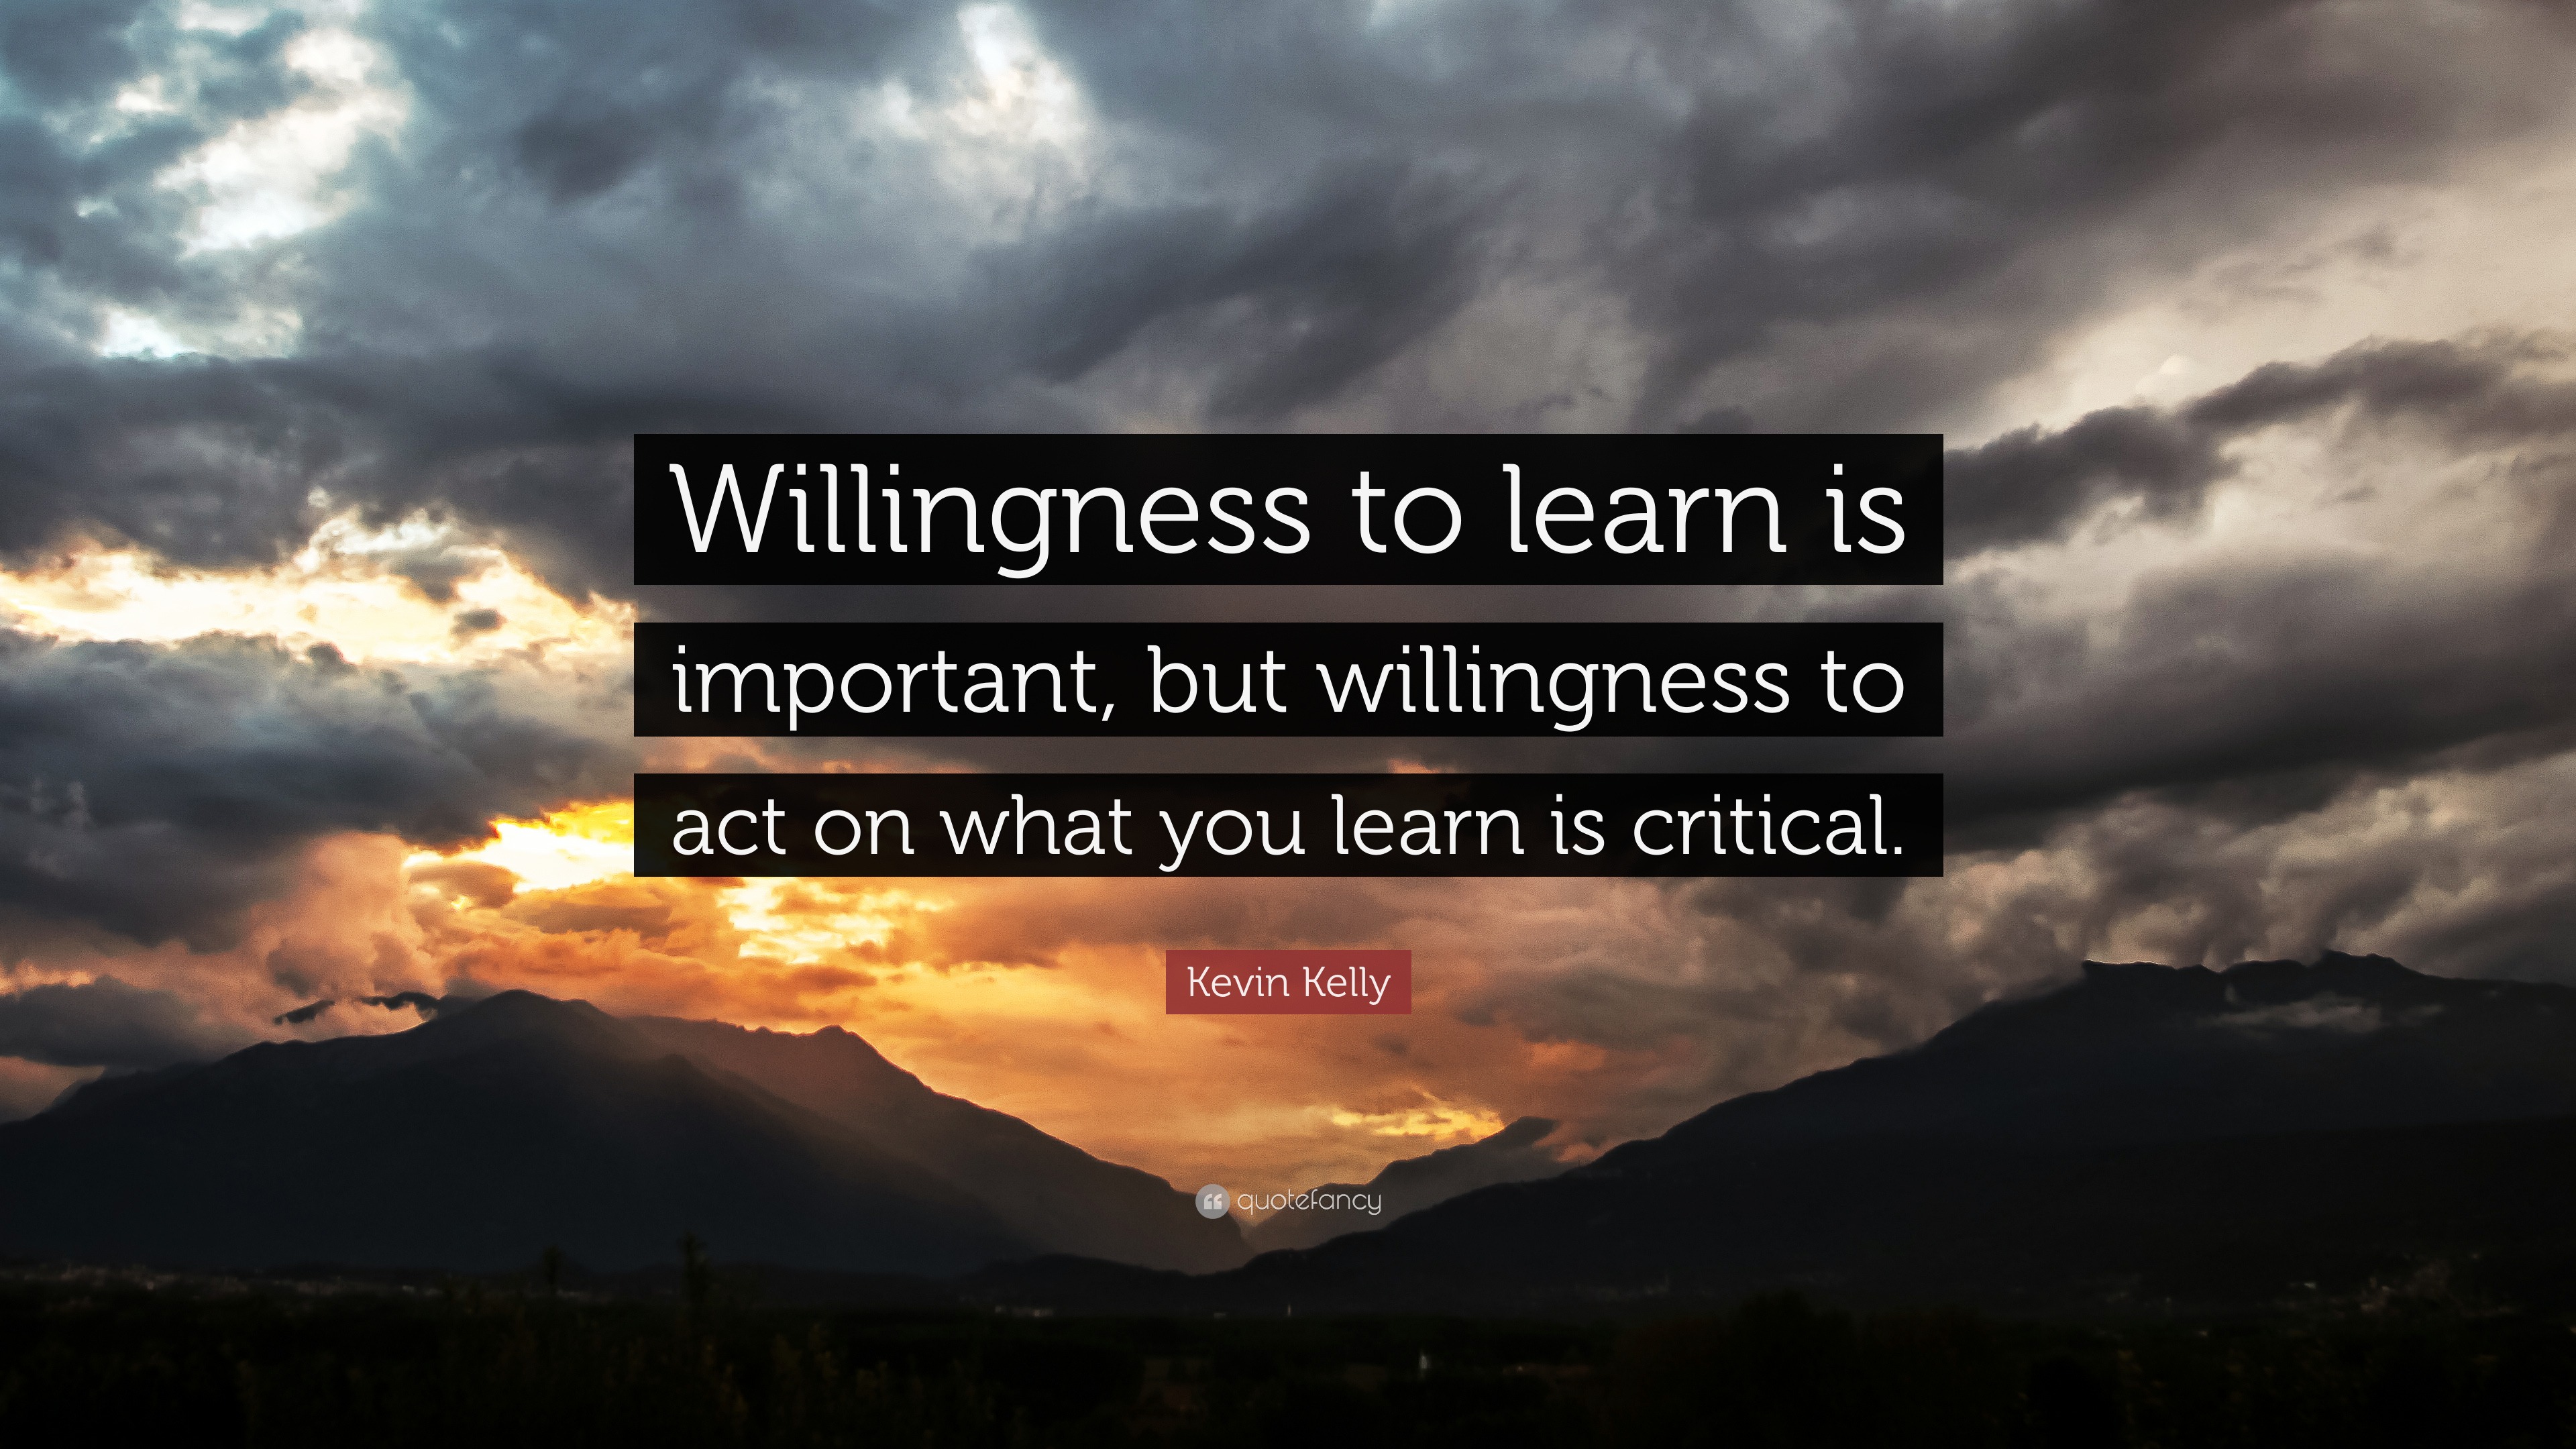 Kevin Kelly Quote: "Willingness to learn is important, but ...